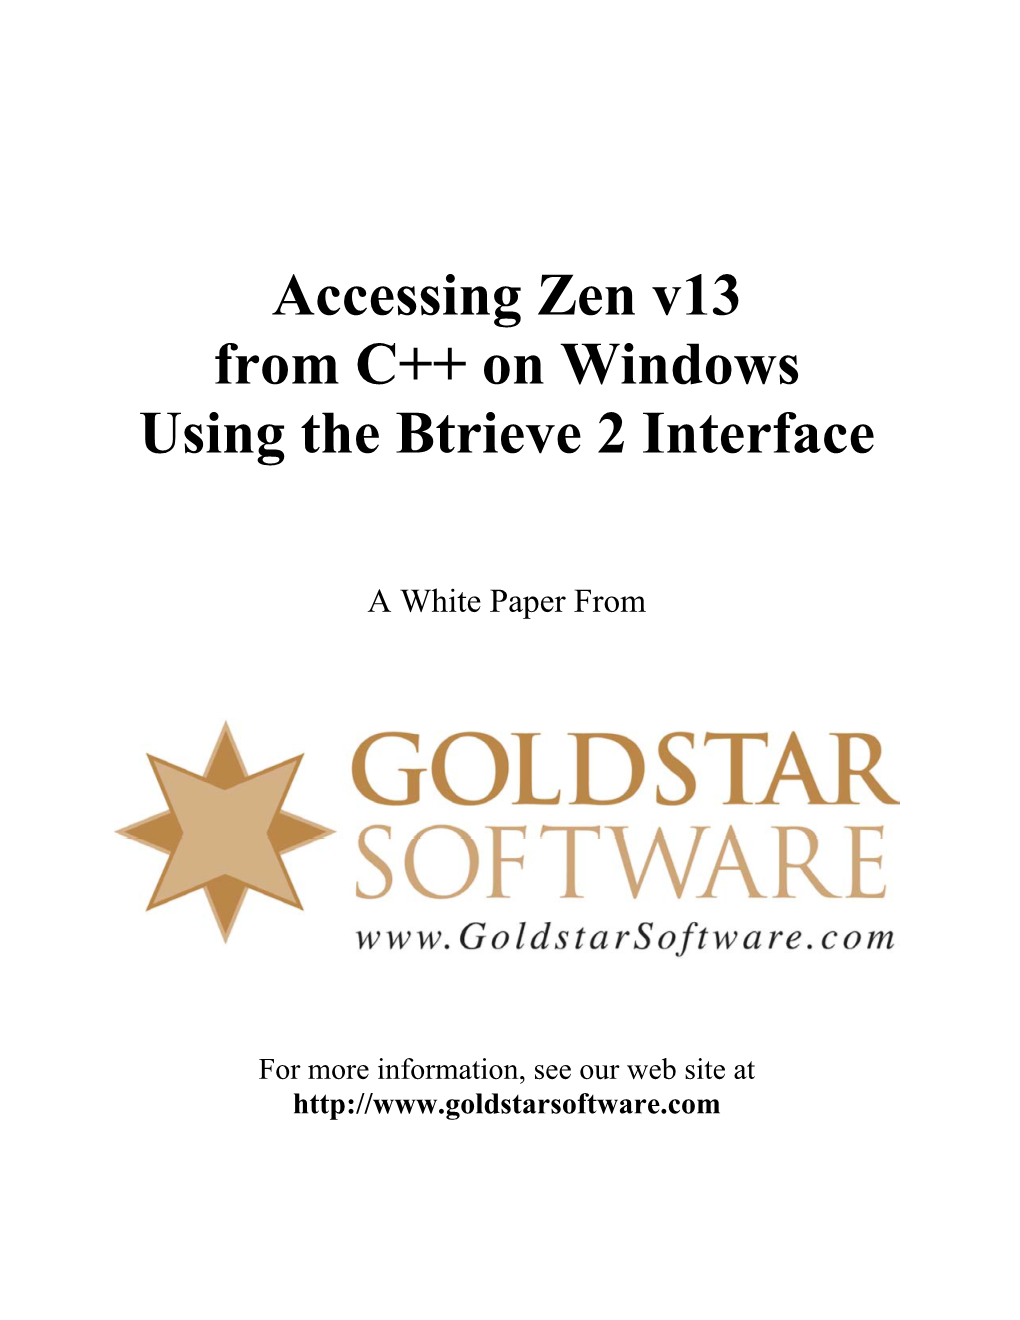 Accessing Zen V13 from C++ on Windows Using the Btrieve 2 Interface